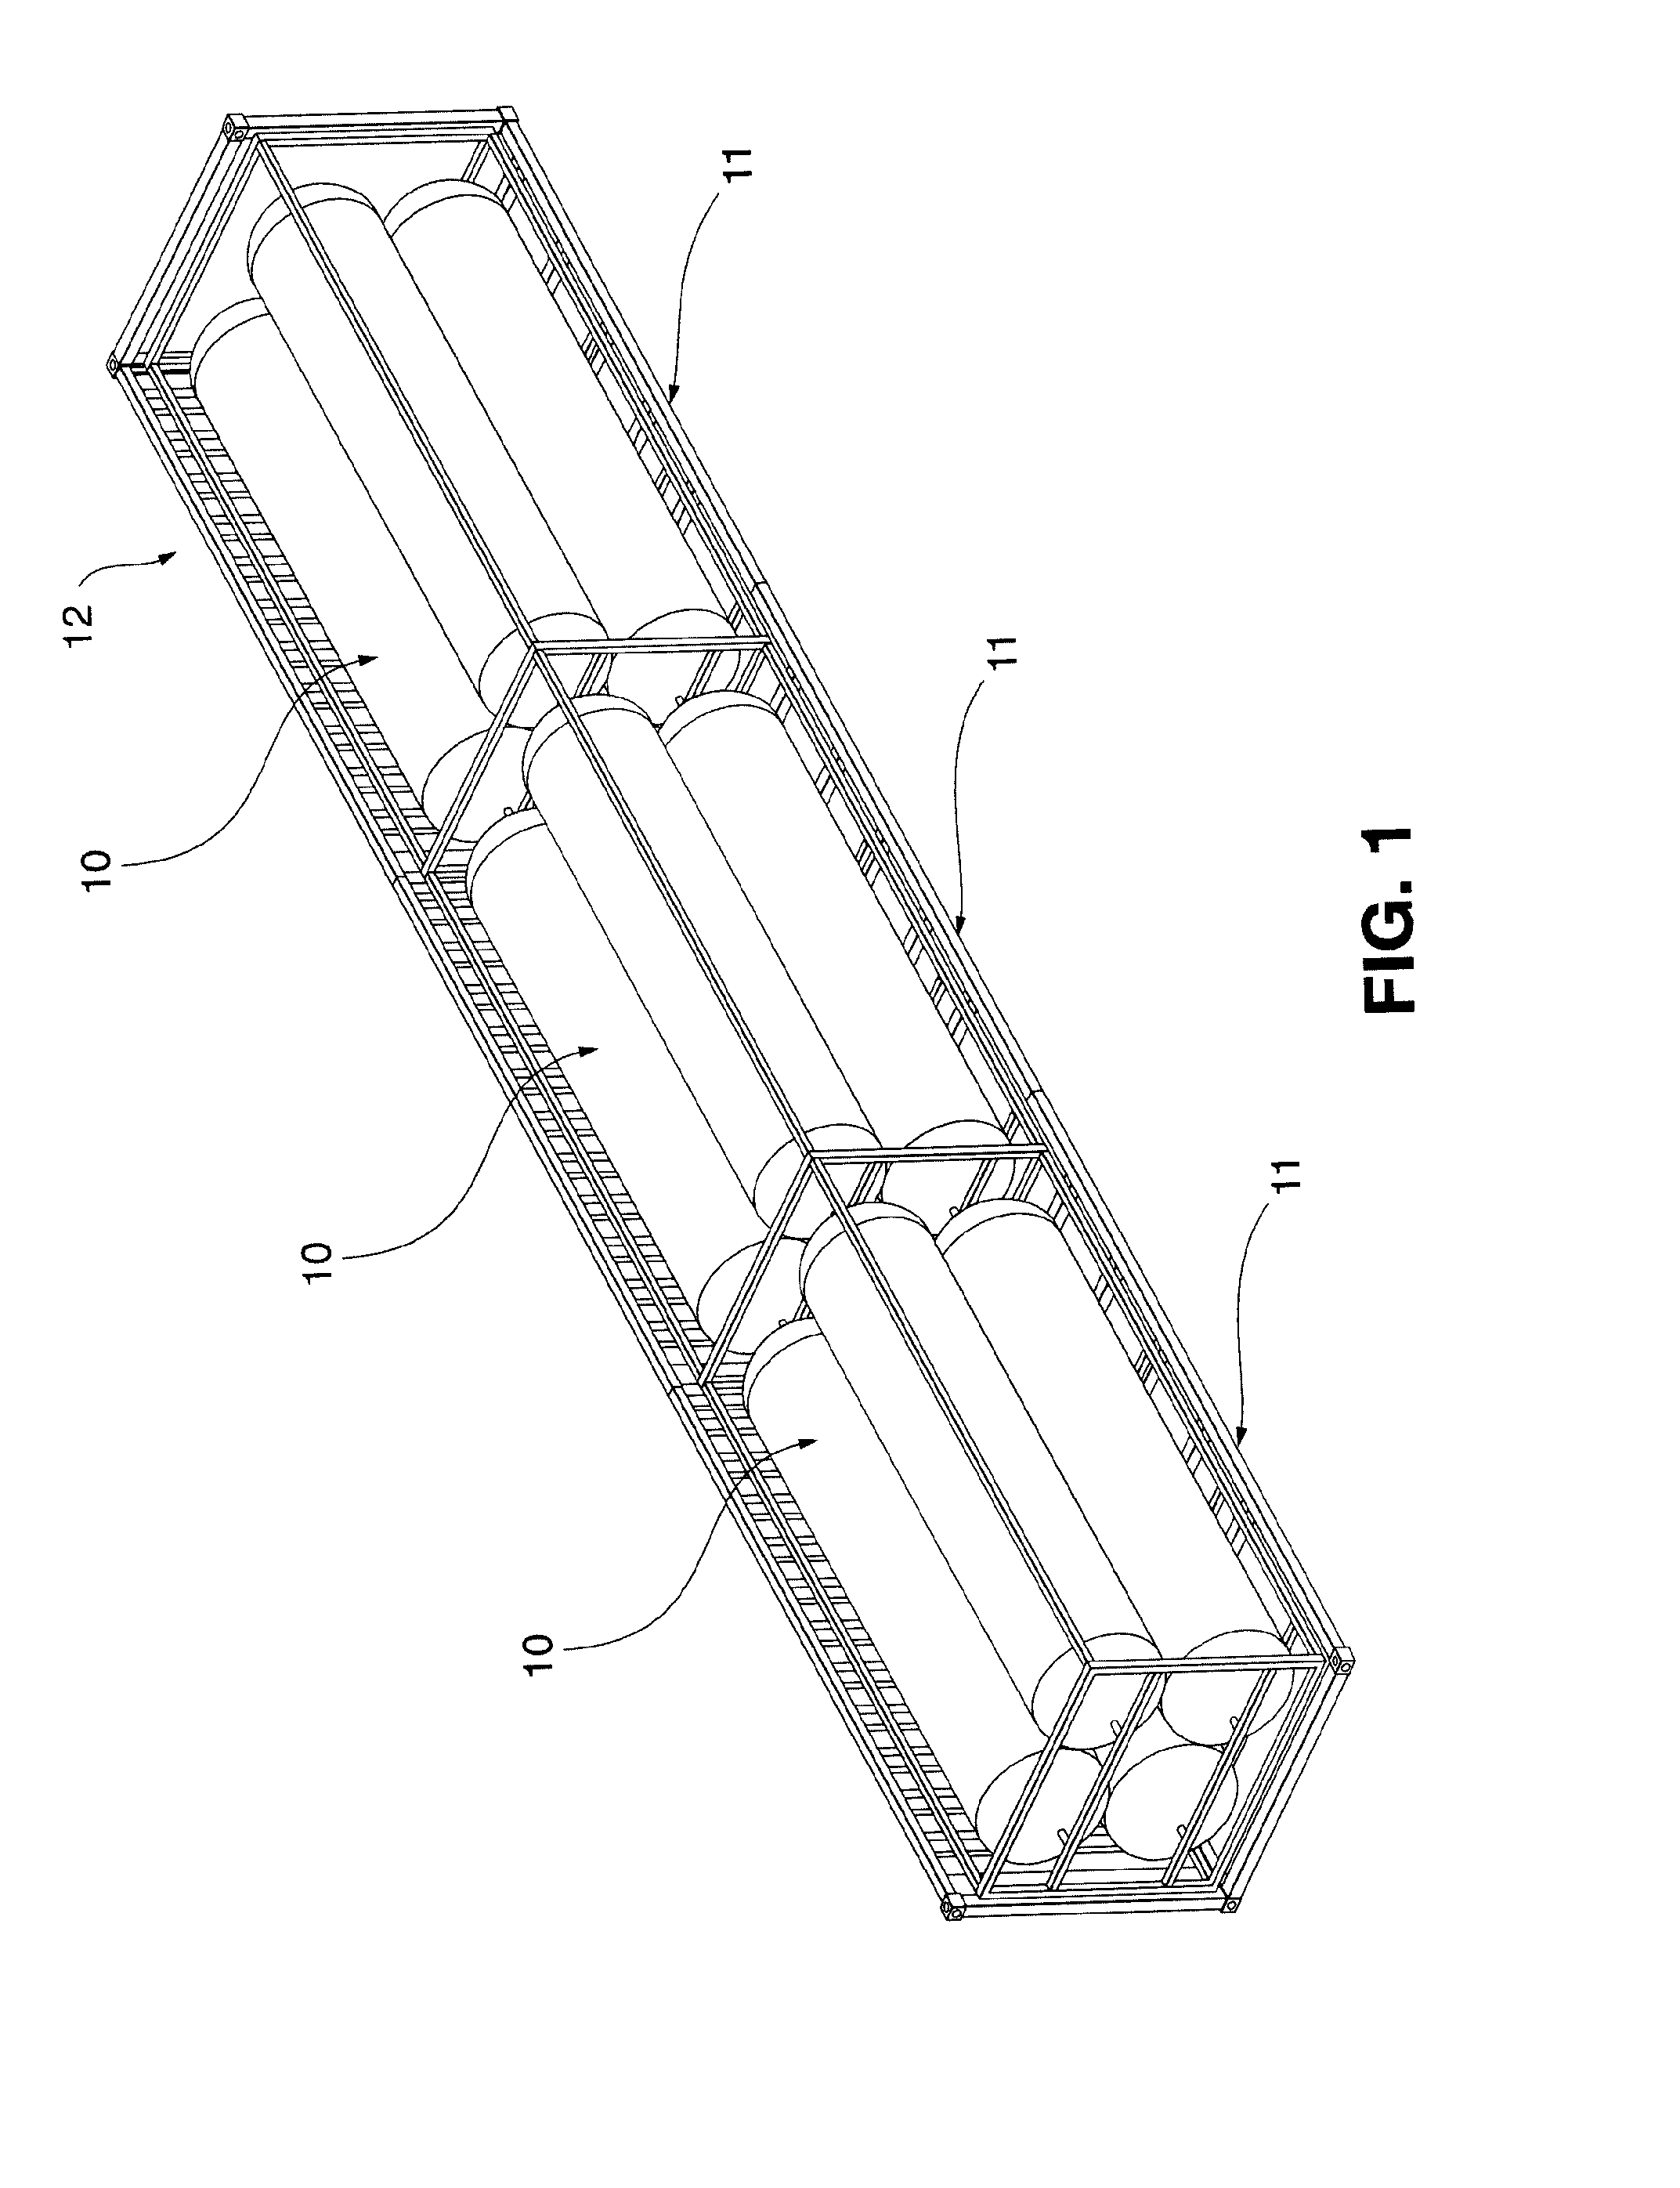 Method of fabricating type 4 cylinders and arranging in transportation housings for transport of gaseous fluids